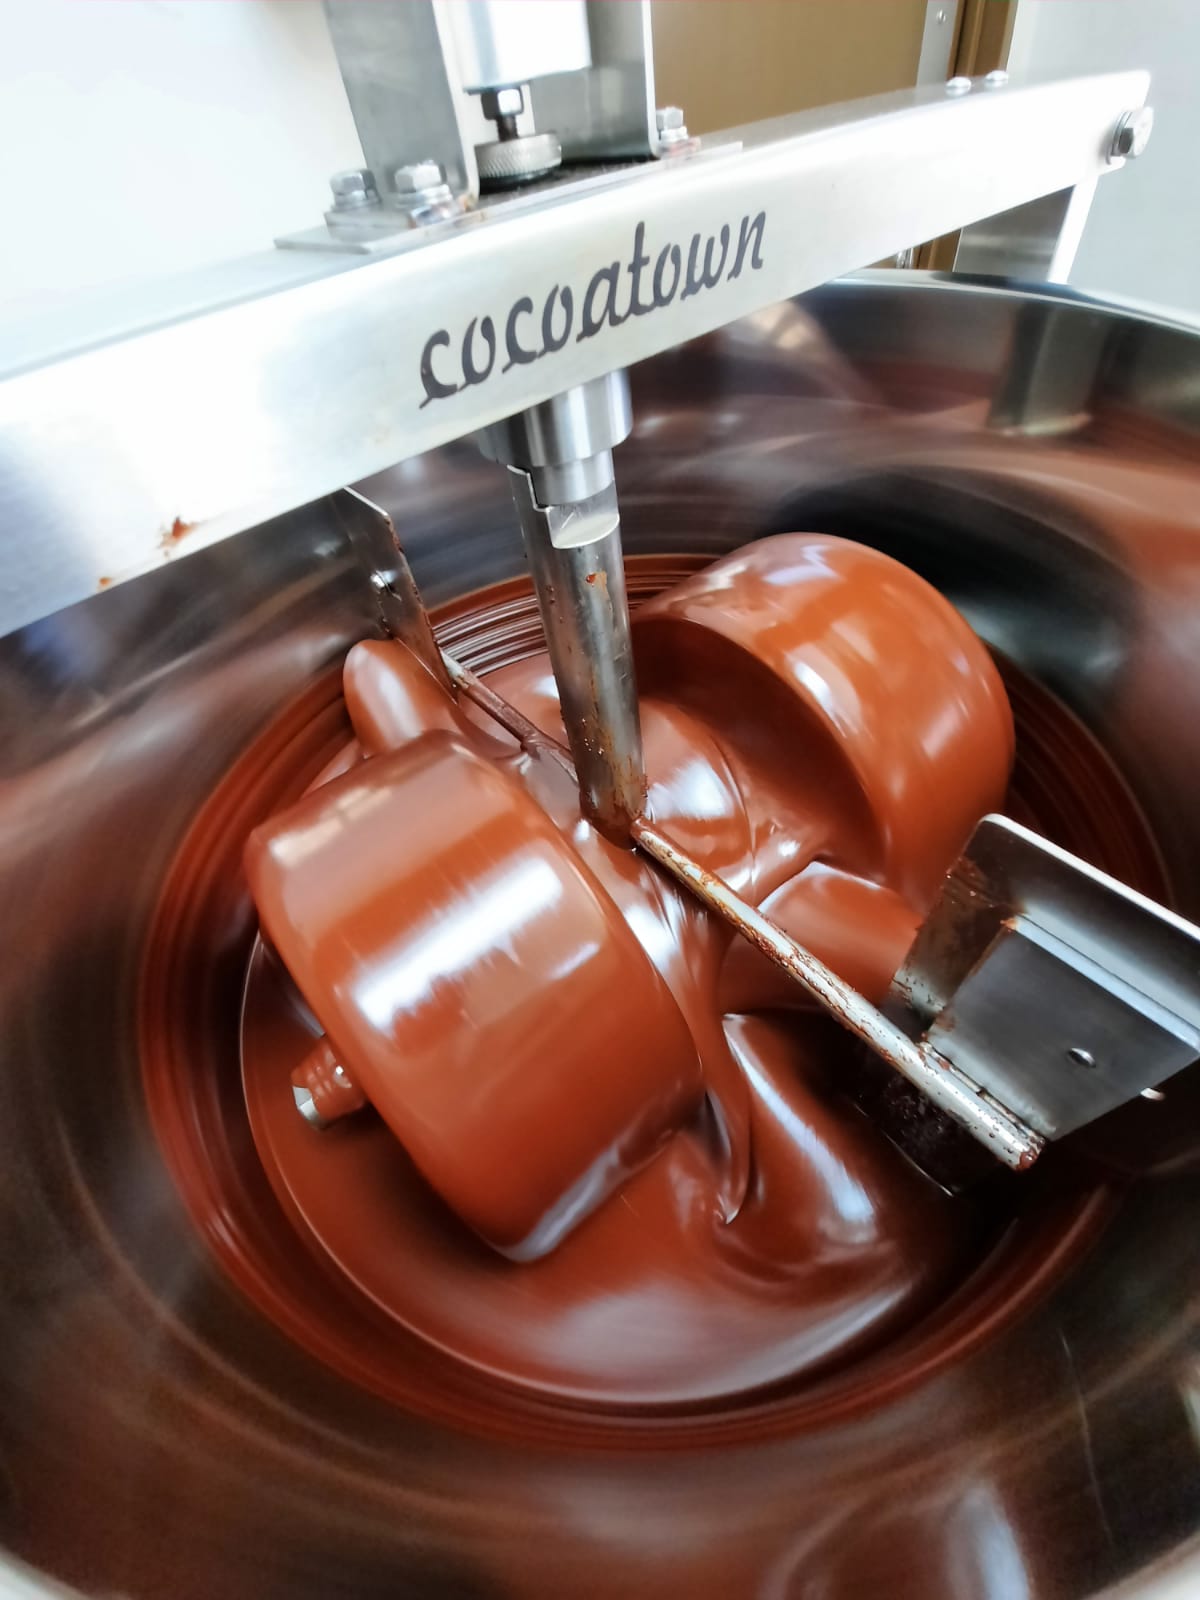 Elevate Your Chocolate Making with CocoaTown’s Latest Innovations